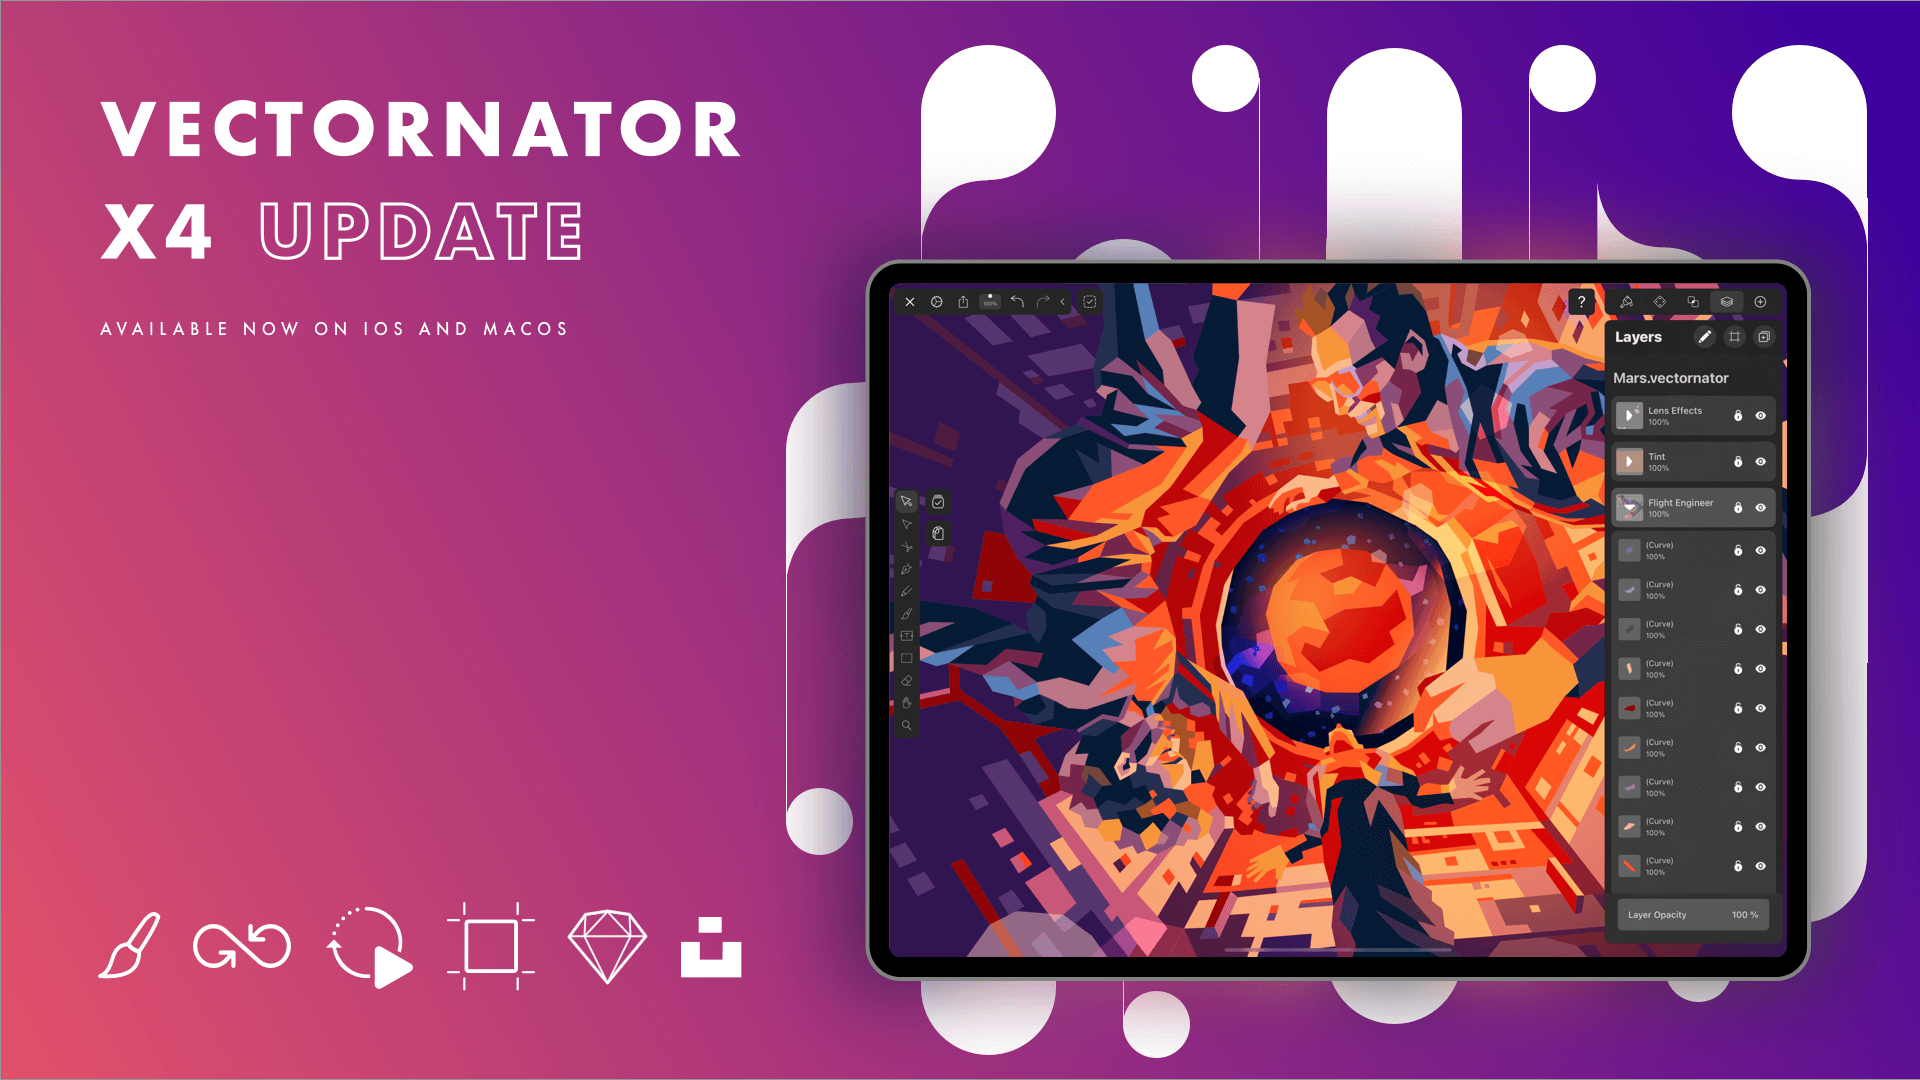 Ad for Vectornator X4 update on a tablet showcasing graphic design software